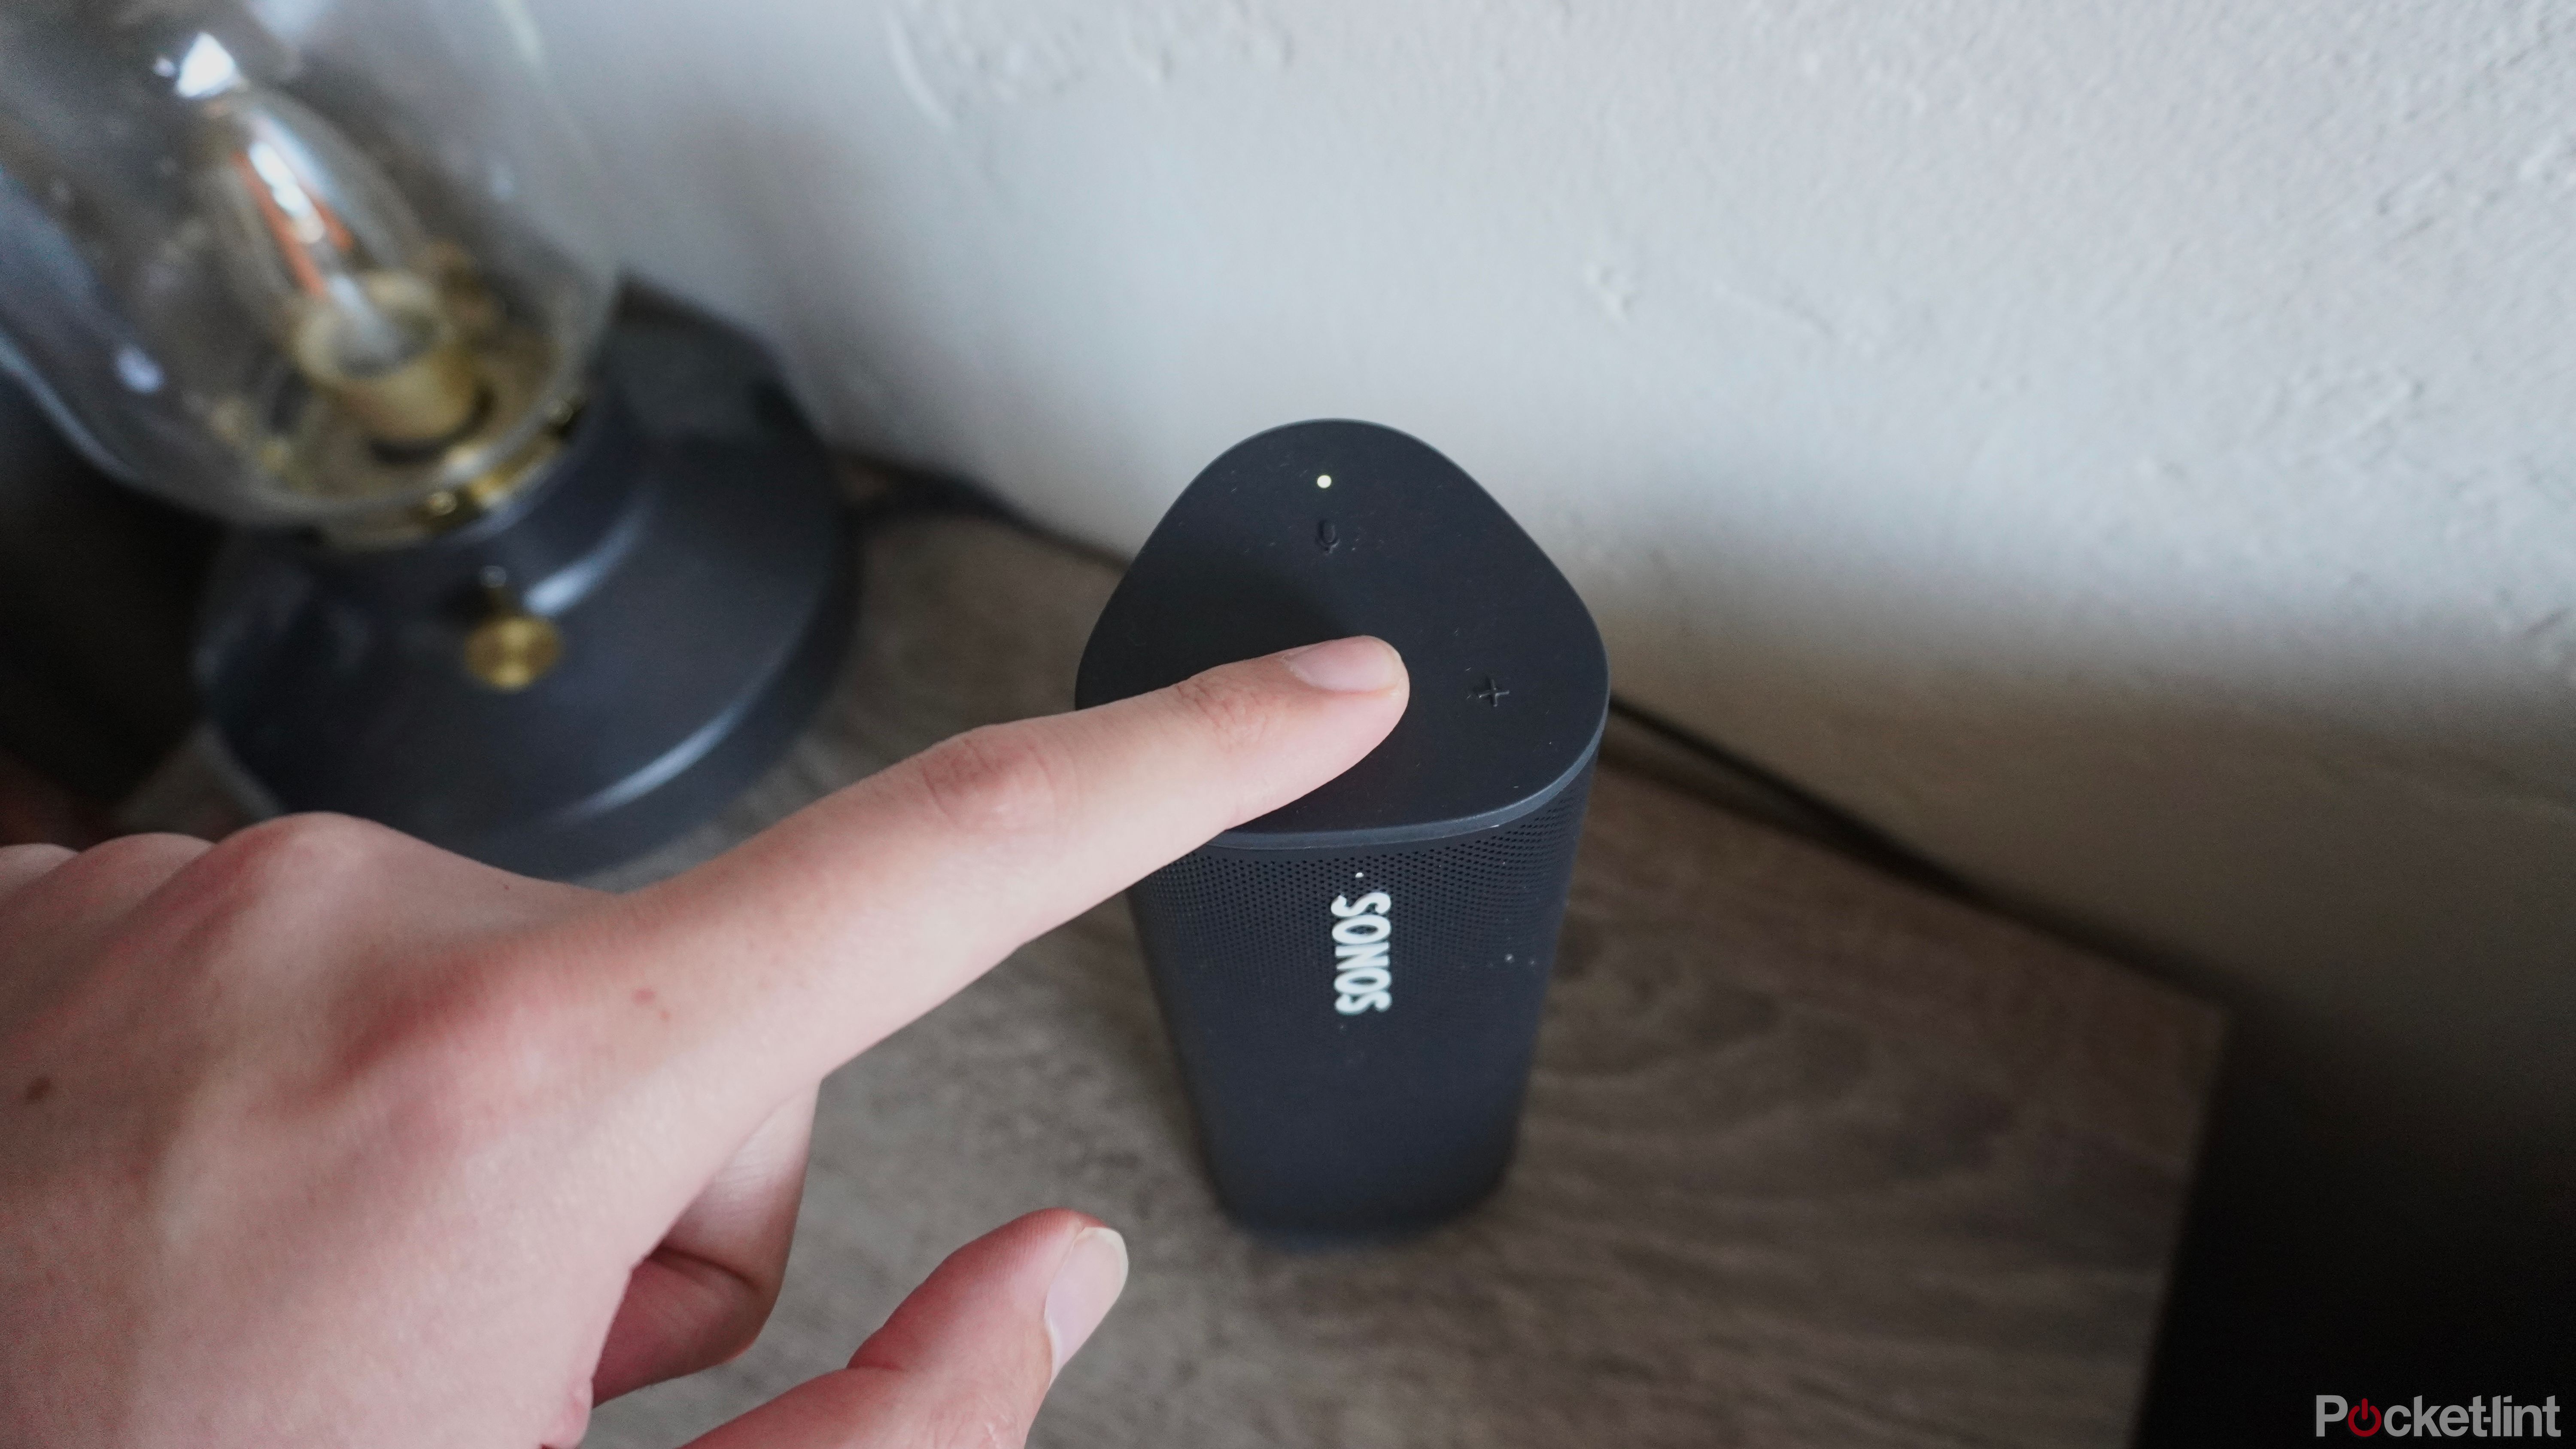 Press the play/pause button on your Sonos Roam speaker.